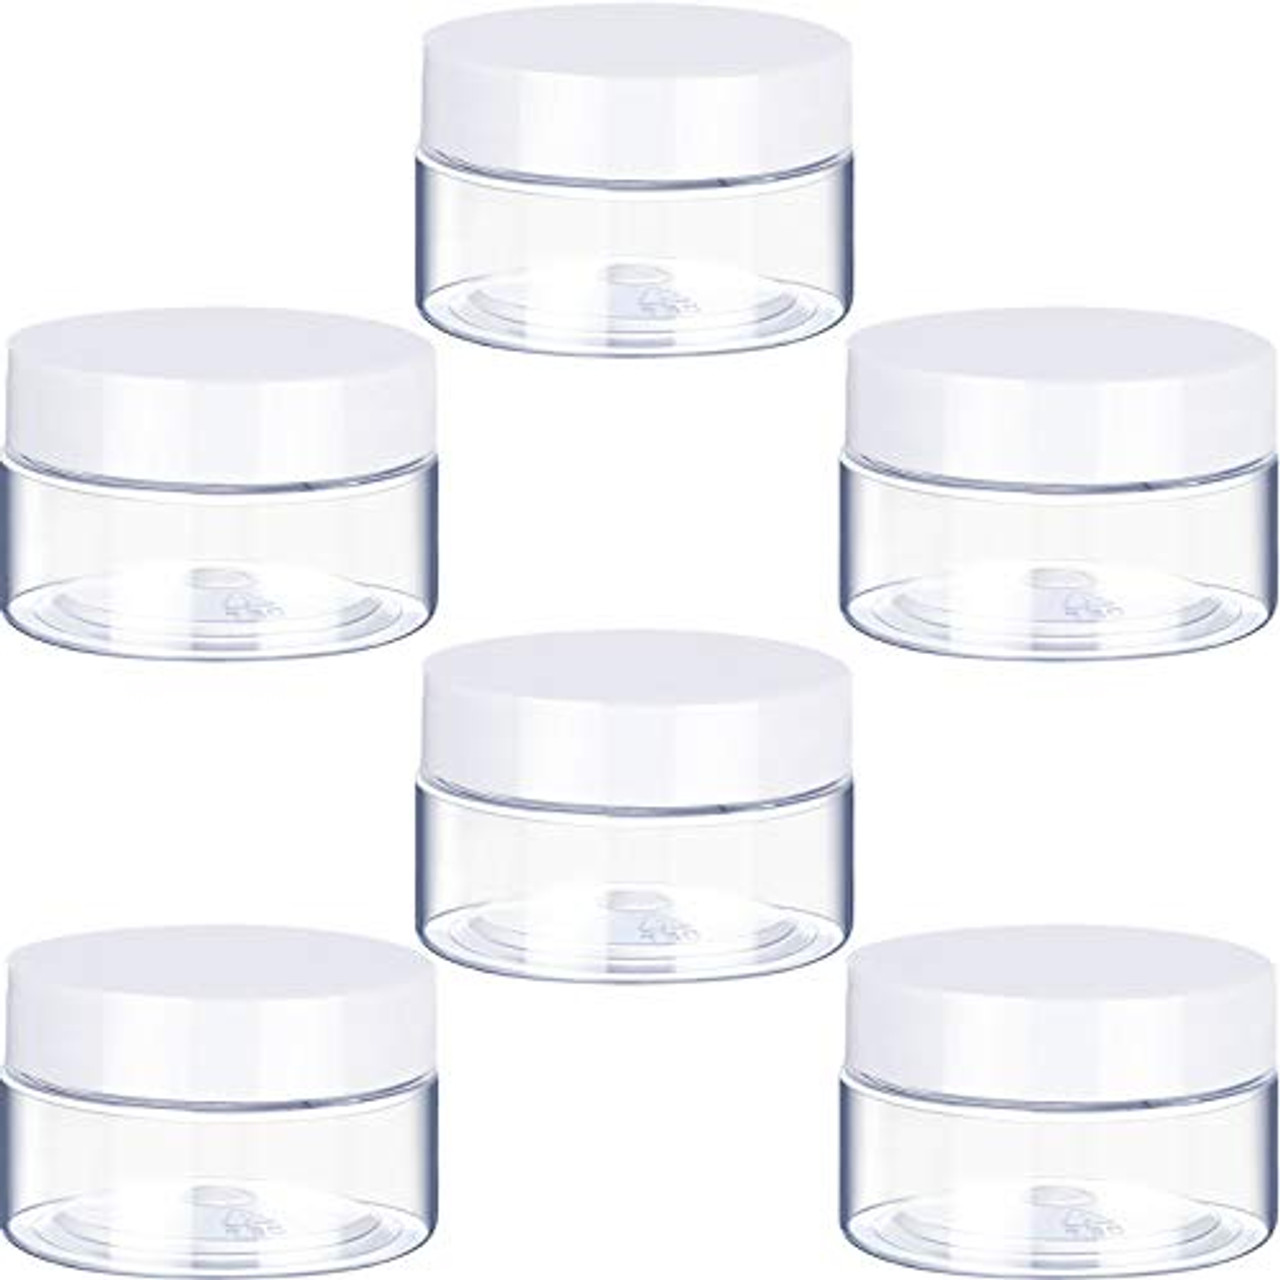 Cosmetic Jars Beauty Containers with Flip Top Hinged Lid - 3 Ml (Clear)  5006 Beauty Makeup Supply